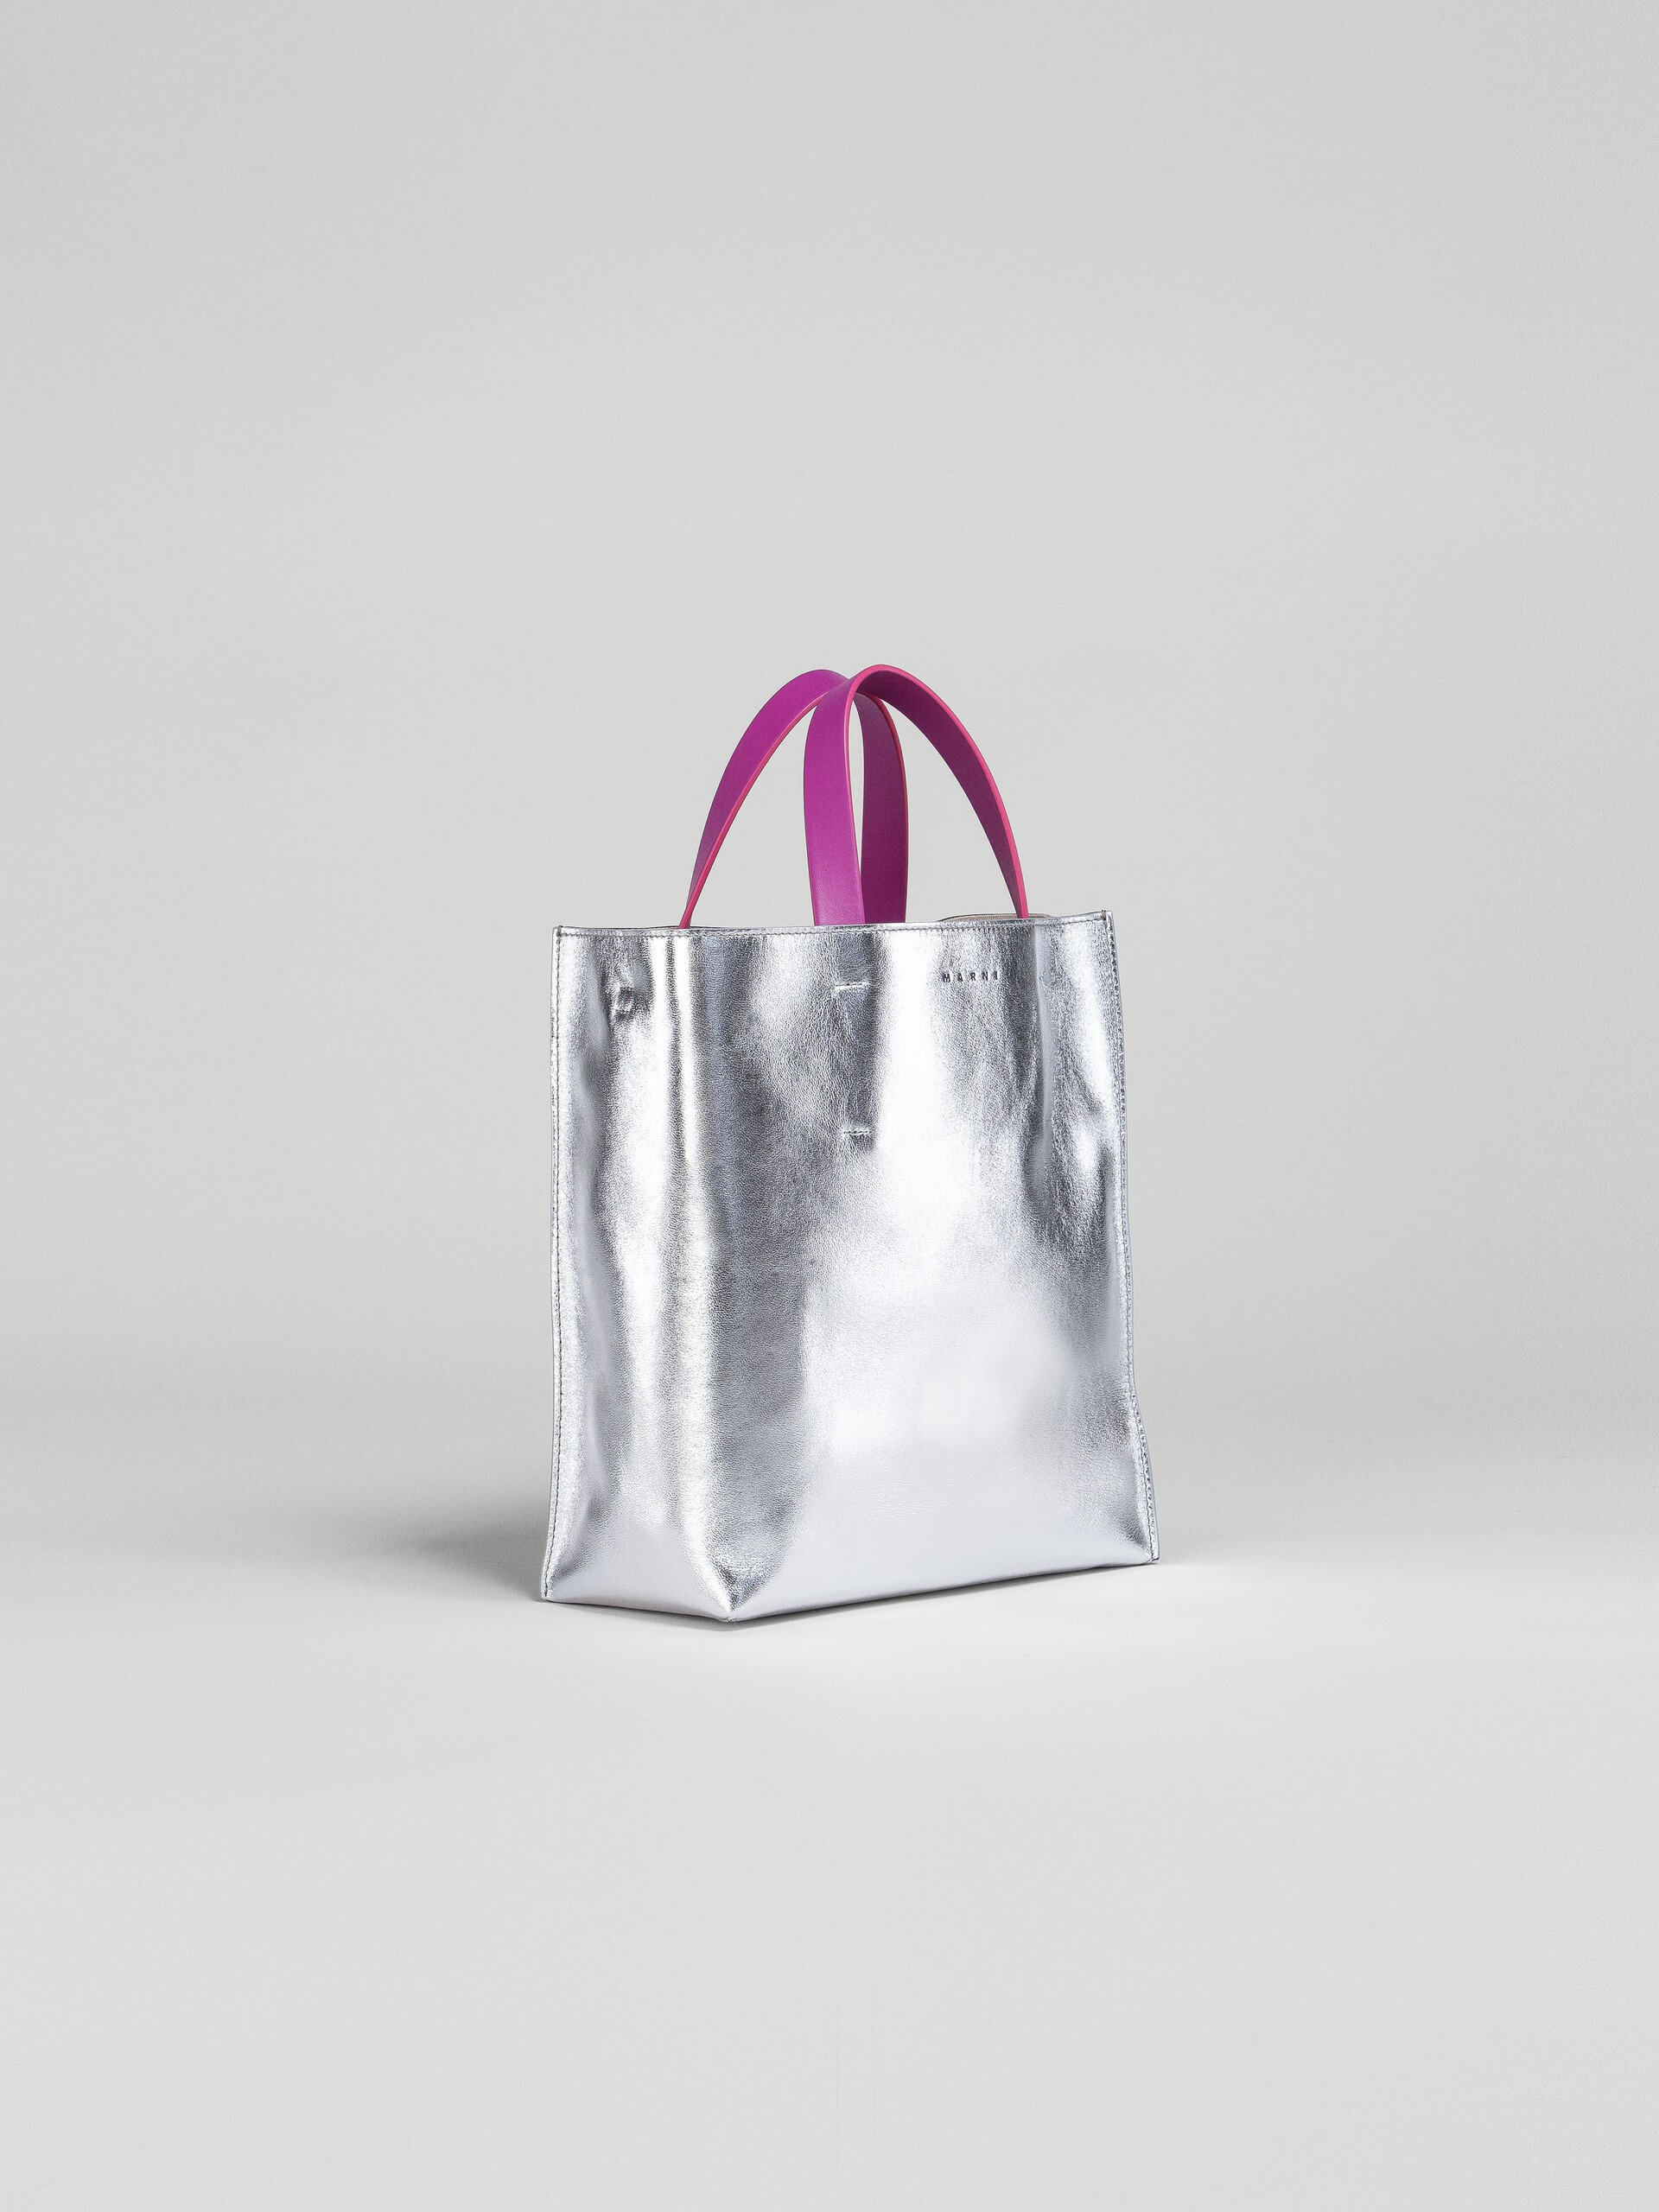 MUSEO SOFT small bag in silver and black metallic leather - Shopping Bags - Image 5